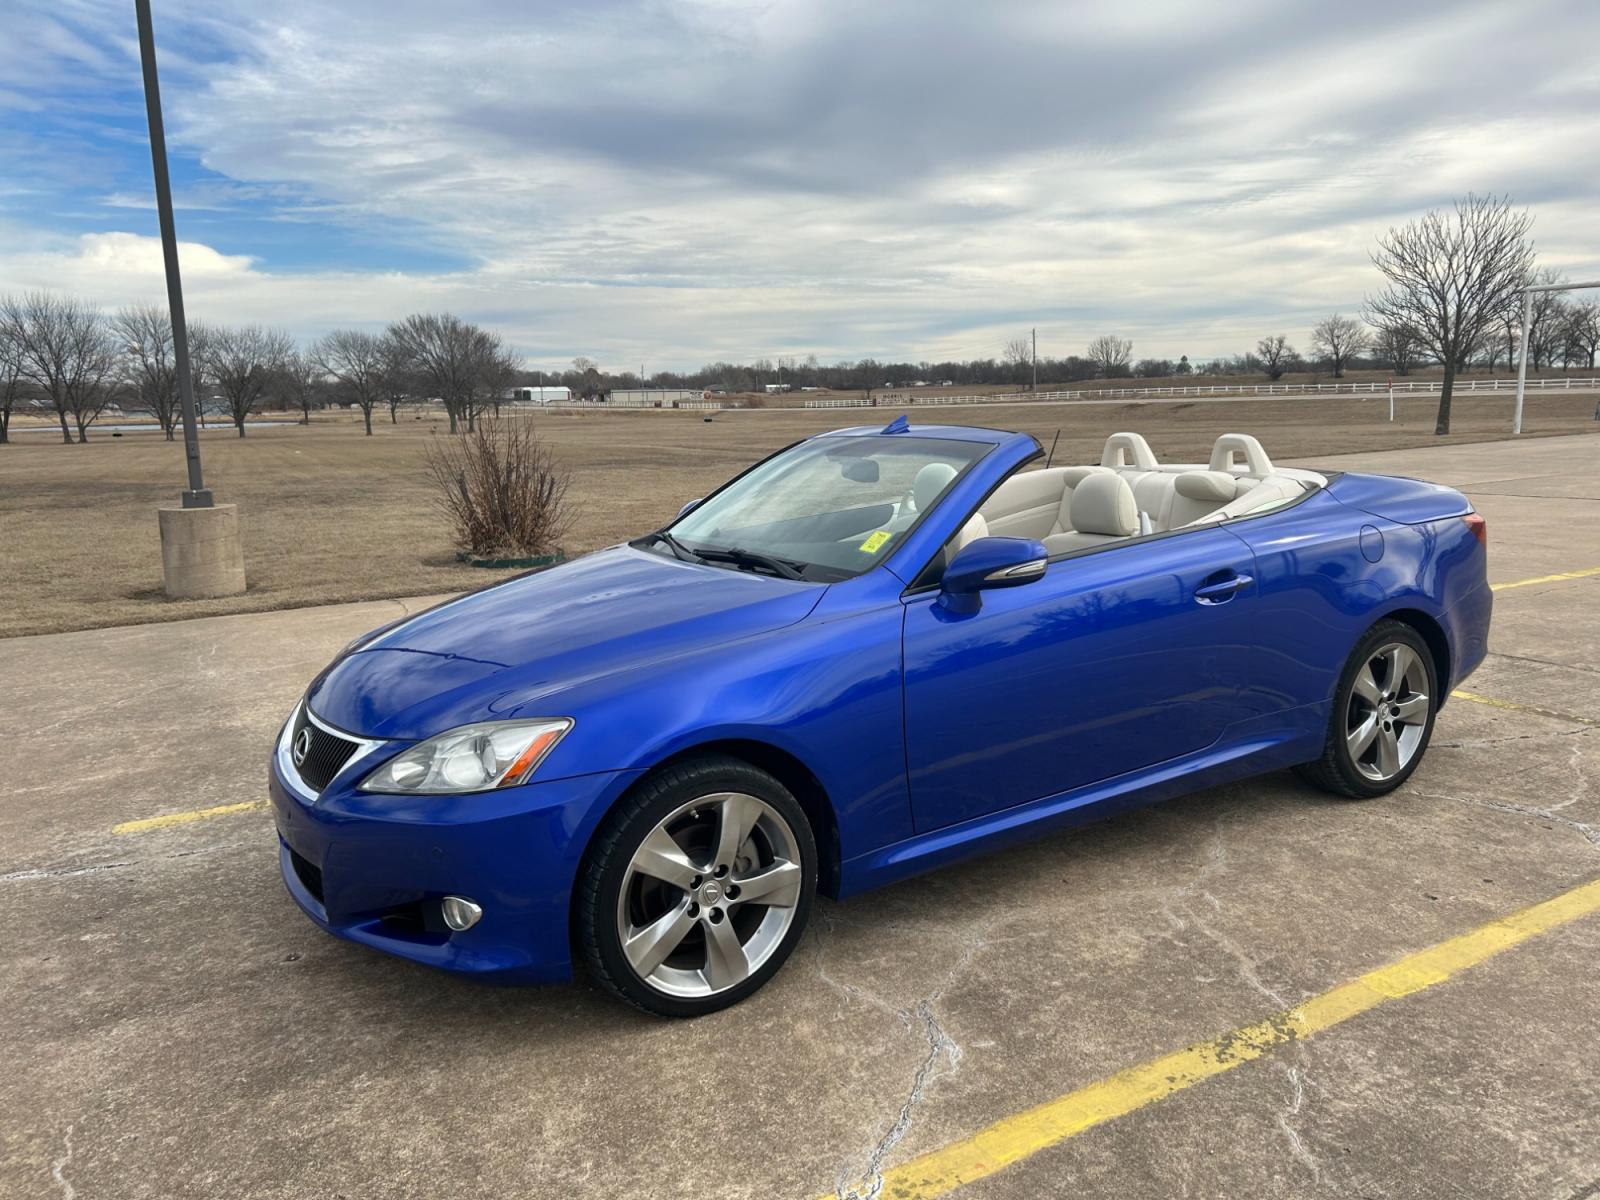 2010 BLUE Lexus IS C IS 250C (JTHFF2C2XA2) , 6-Speed Automatic transmission, located at 17760 Hwy 62, Morris, OK, 74445, (918) 733-4887, 35.609104, -95.877060 - 2010 LEXUS IS 250C HAS A 2.5L V6 AND IS RWD, THIS CONVERTIBLE FEATURES KEYLESS REMOTE ENTRY, PUSH BUTTON ENGINE START, POWER LOCKS, POWER WINDOWS, POWER SEATS, POWER MIRRORS, AM/FM STEREO, SATELLITE RADIO, CD PLAYER, AUX PORT, USB PORT, TOUCH SCREEN DISPLAY, LEATHER SEATS, 3 SETTING MEMORY SEATS, DU - Photo #1